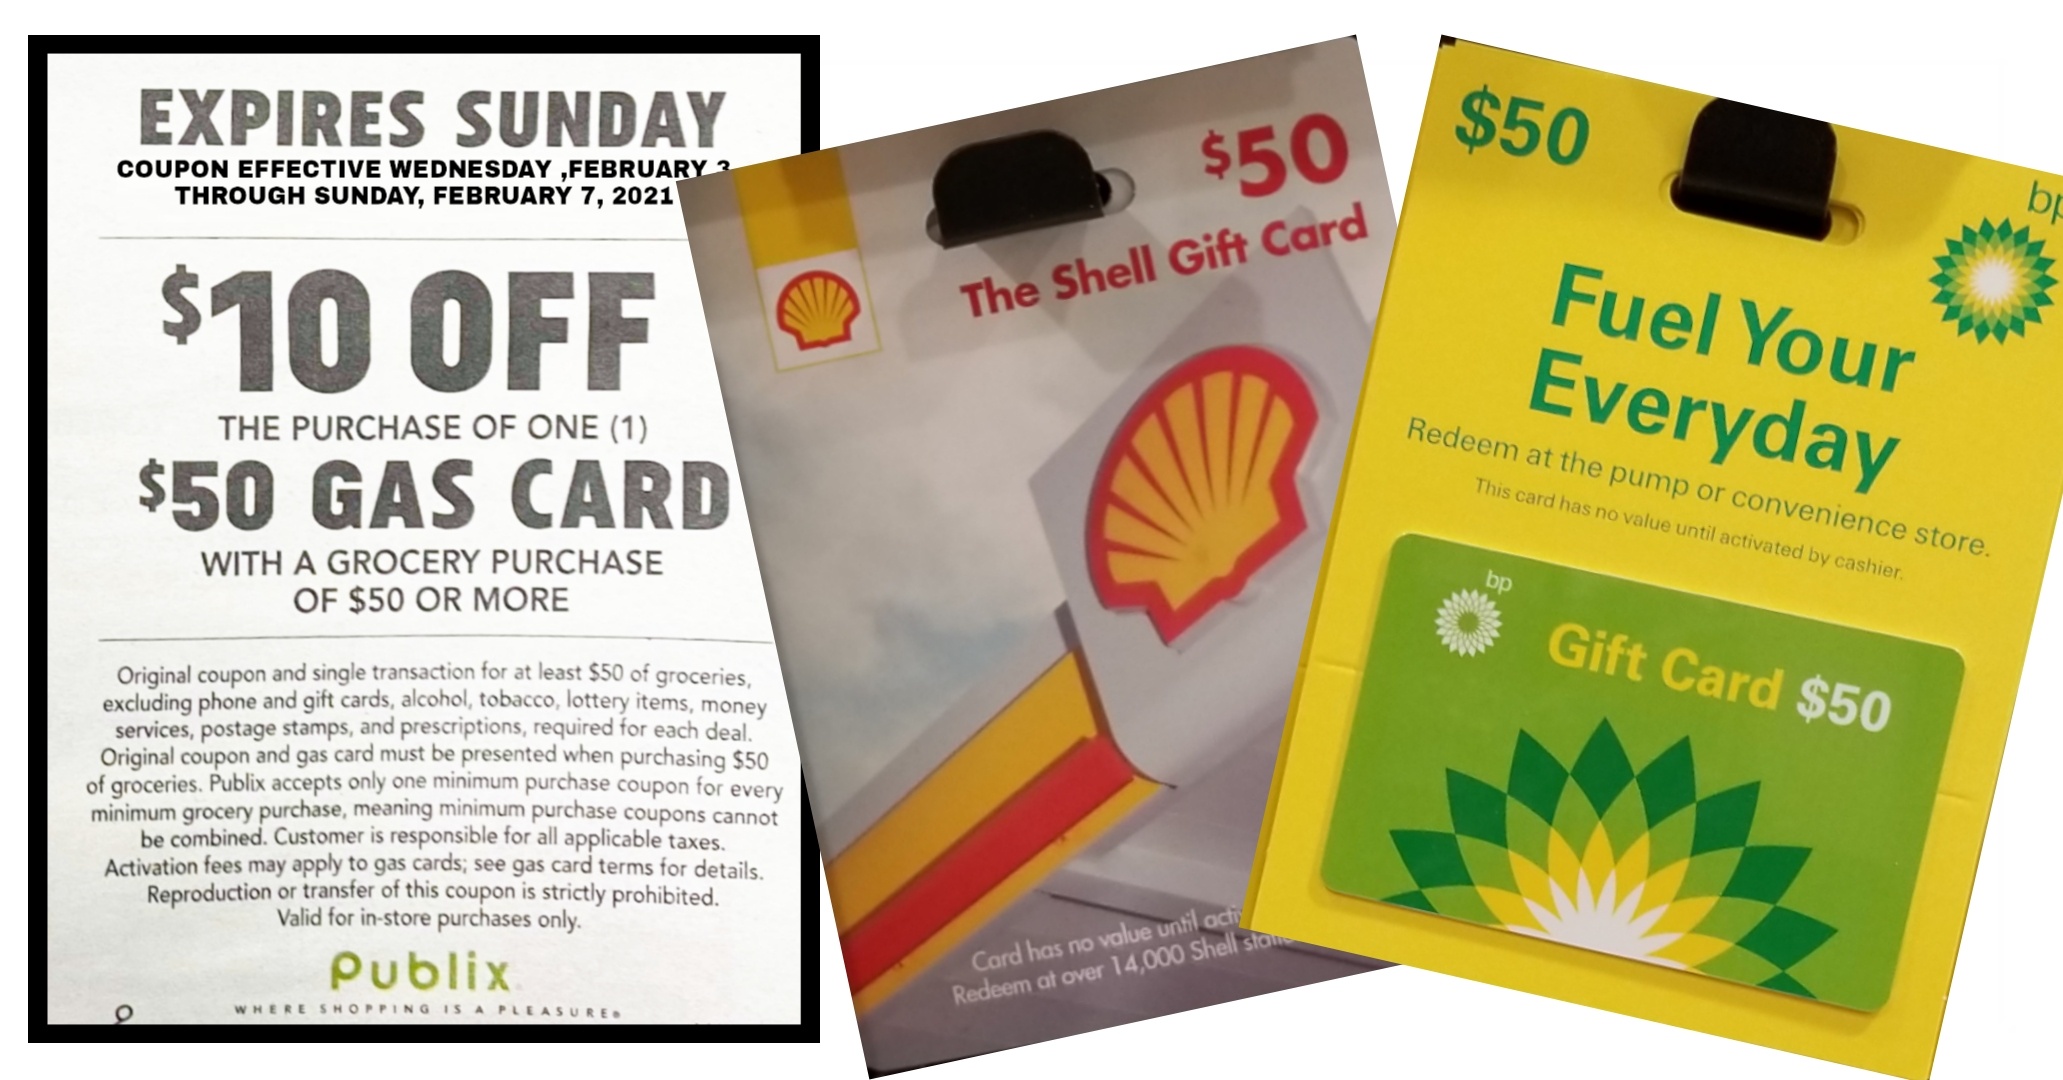 10-off-50-gas-card-wyb-50-or-more-grocery-purchase-valid-2-3-to-2